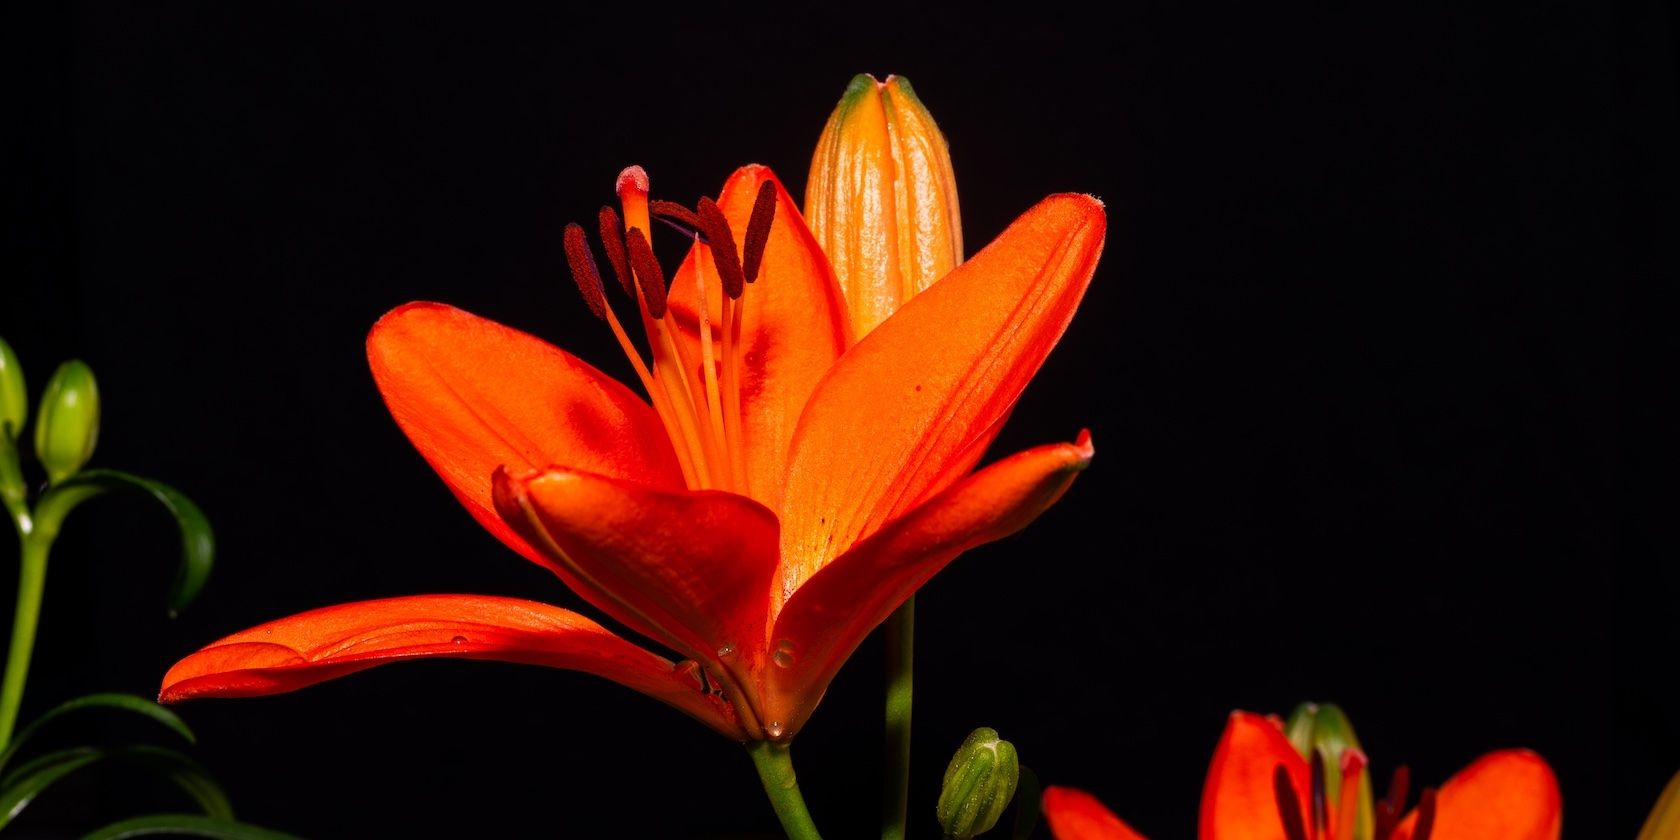 How to Make a Blooming Flower Time-Lapse: A Beginner's Guide